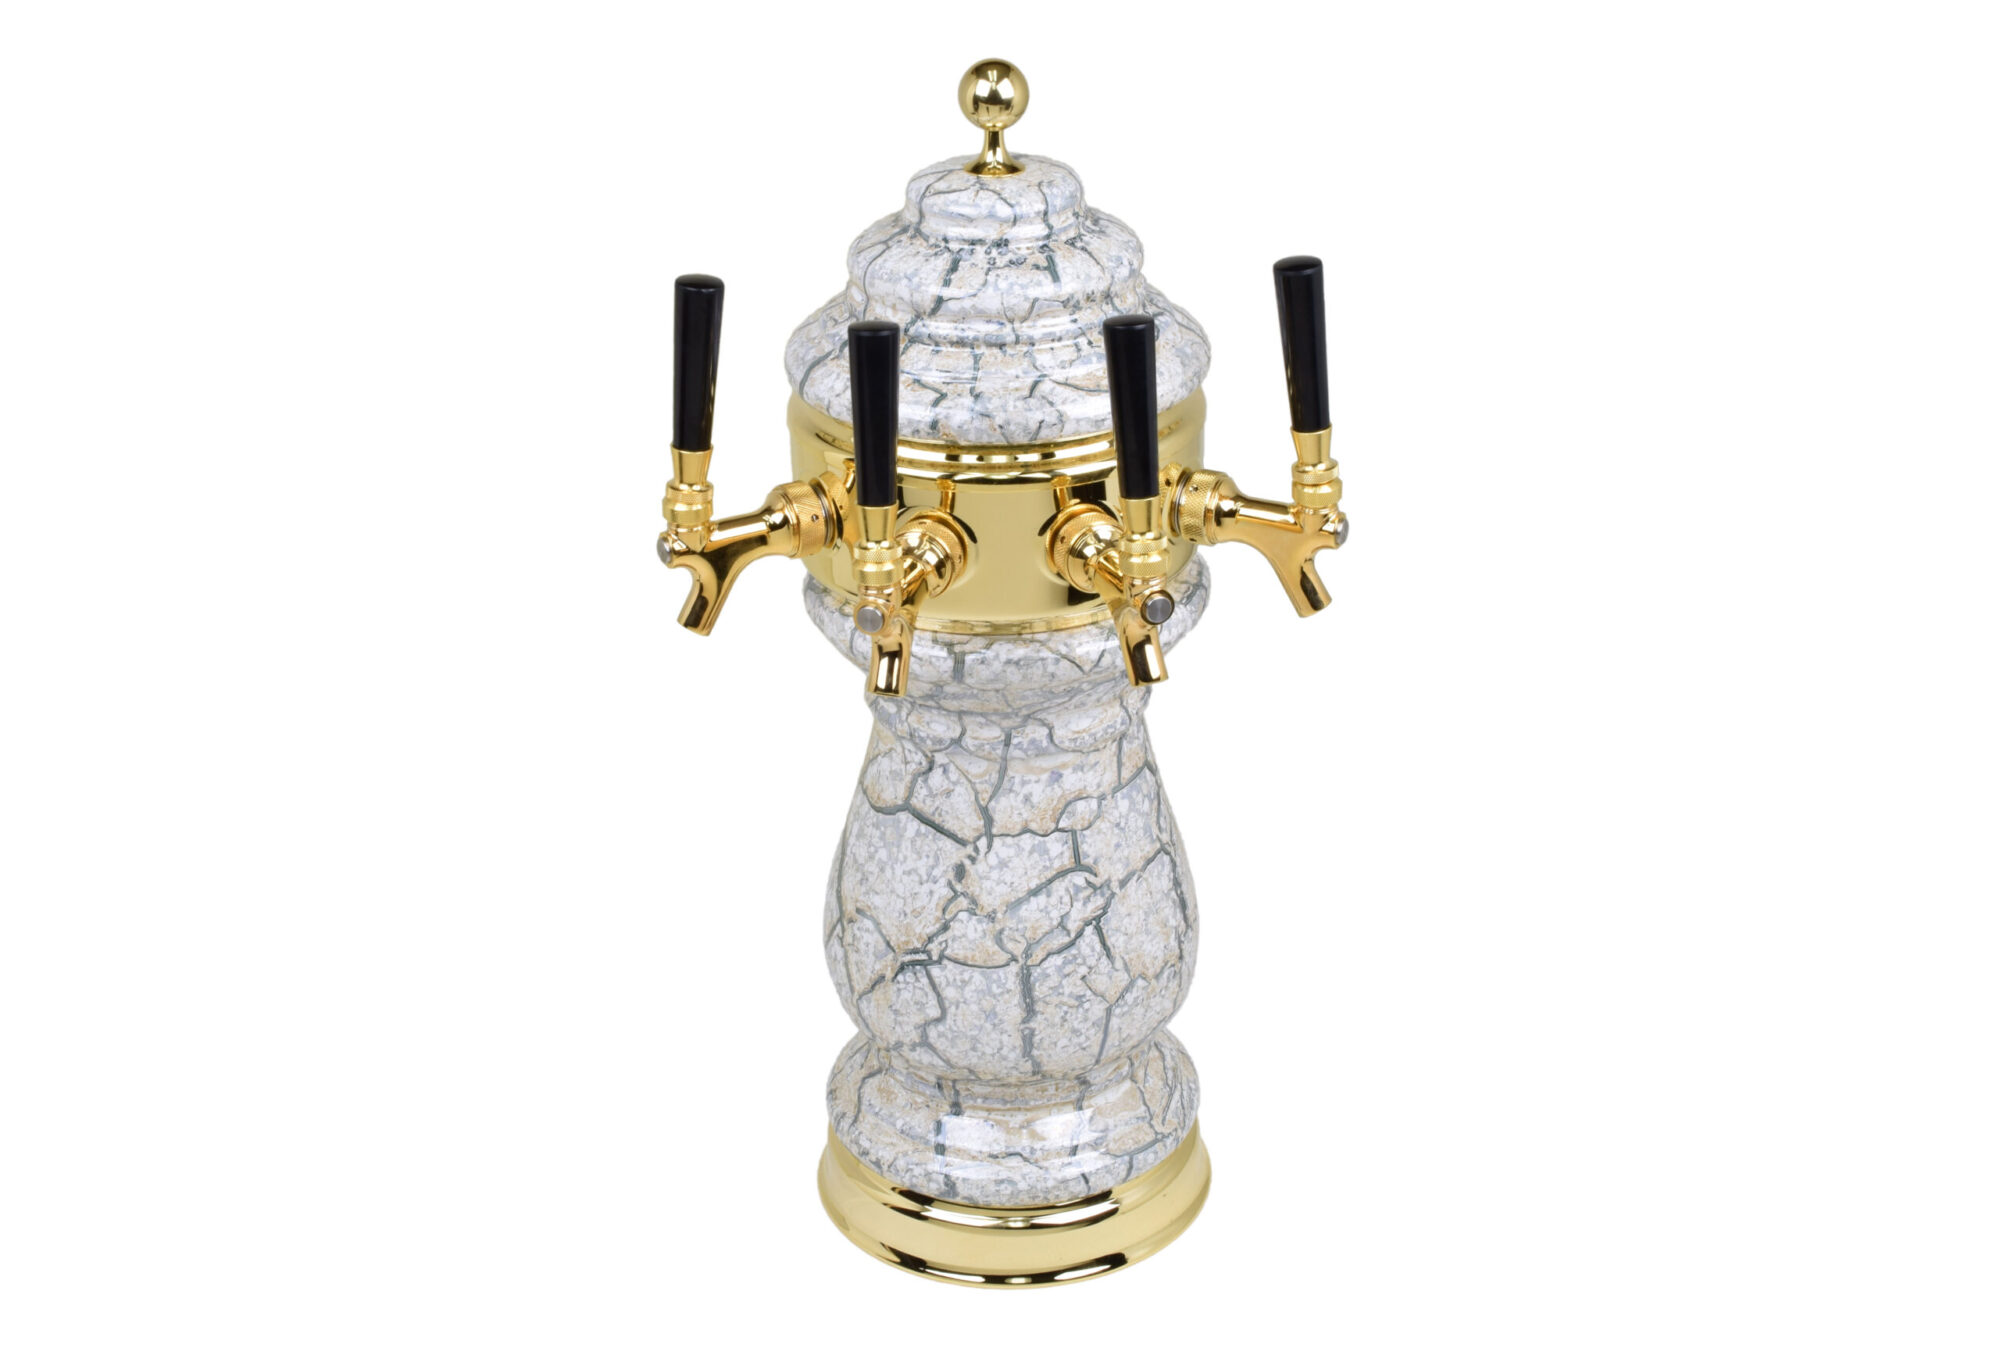 882B-4 Four Faucet Ceramic Tower with PVD Brass Hardware - Available in 5 Colors - Shown in Beige Marble